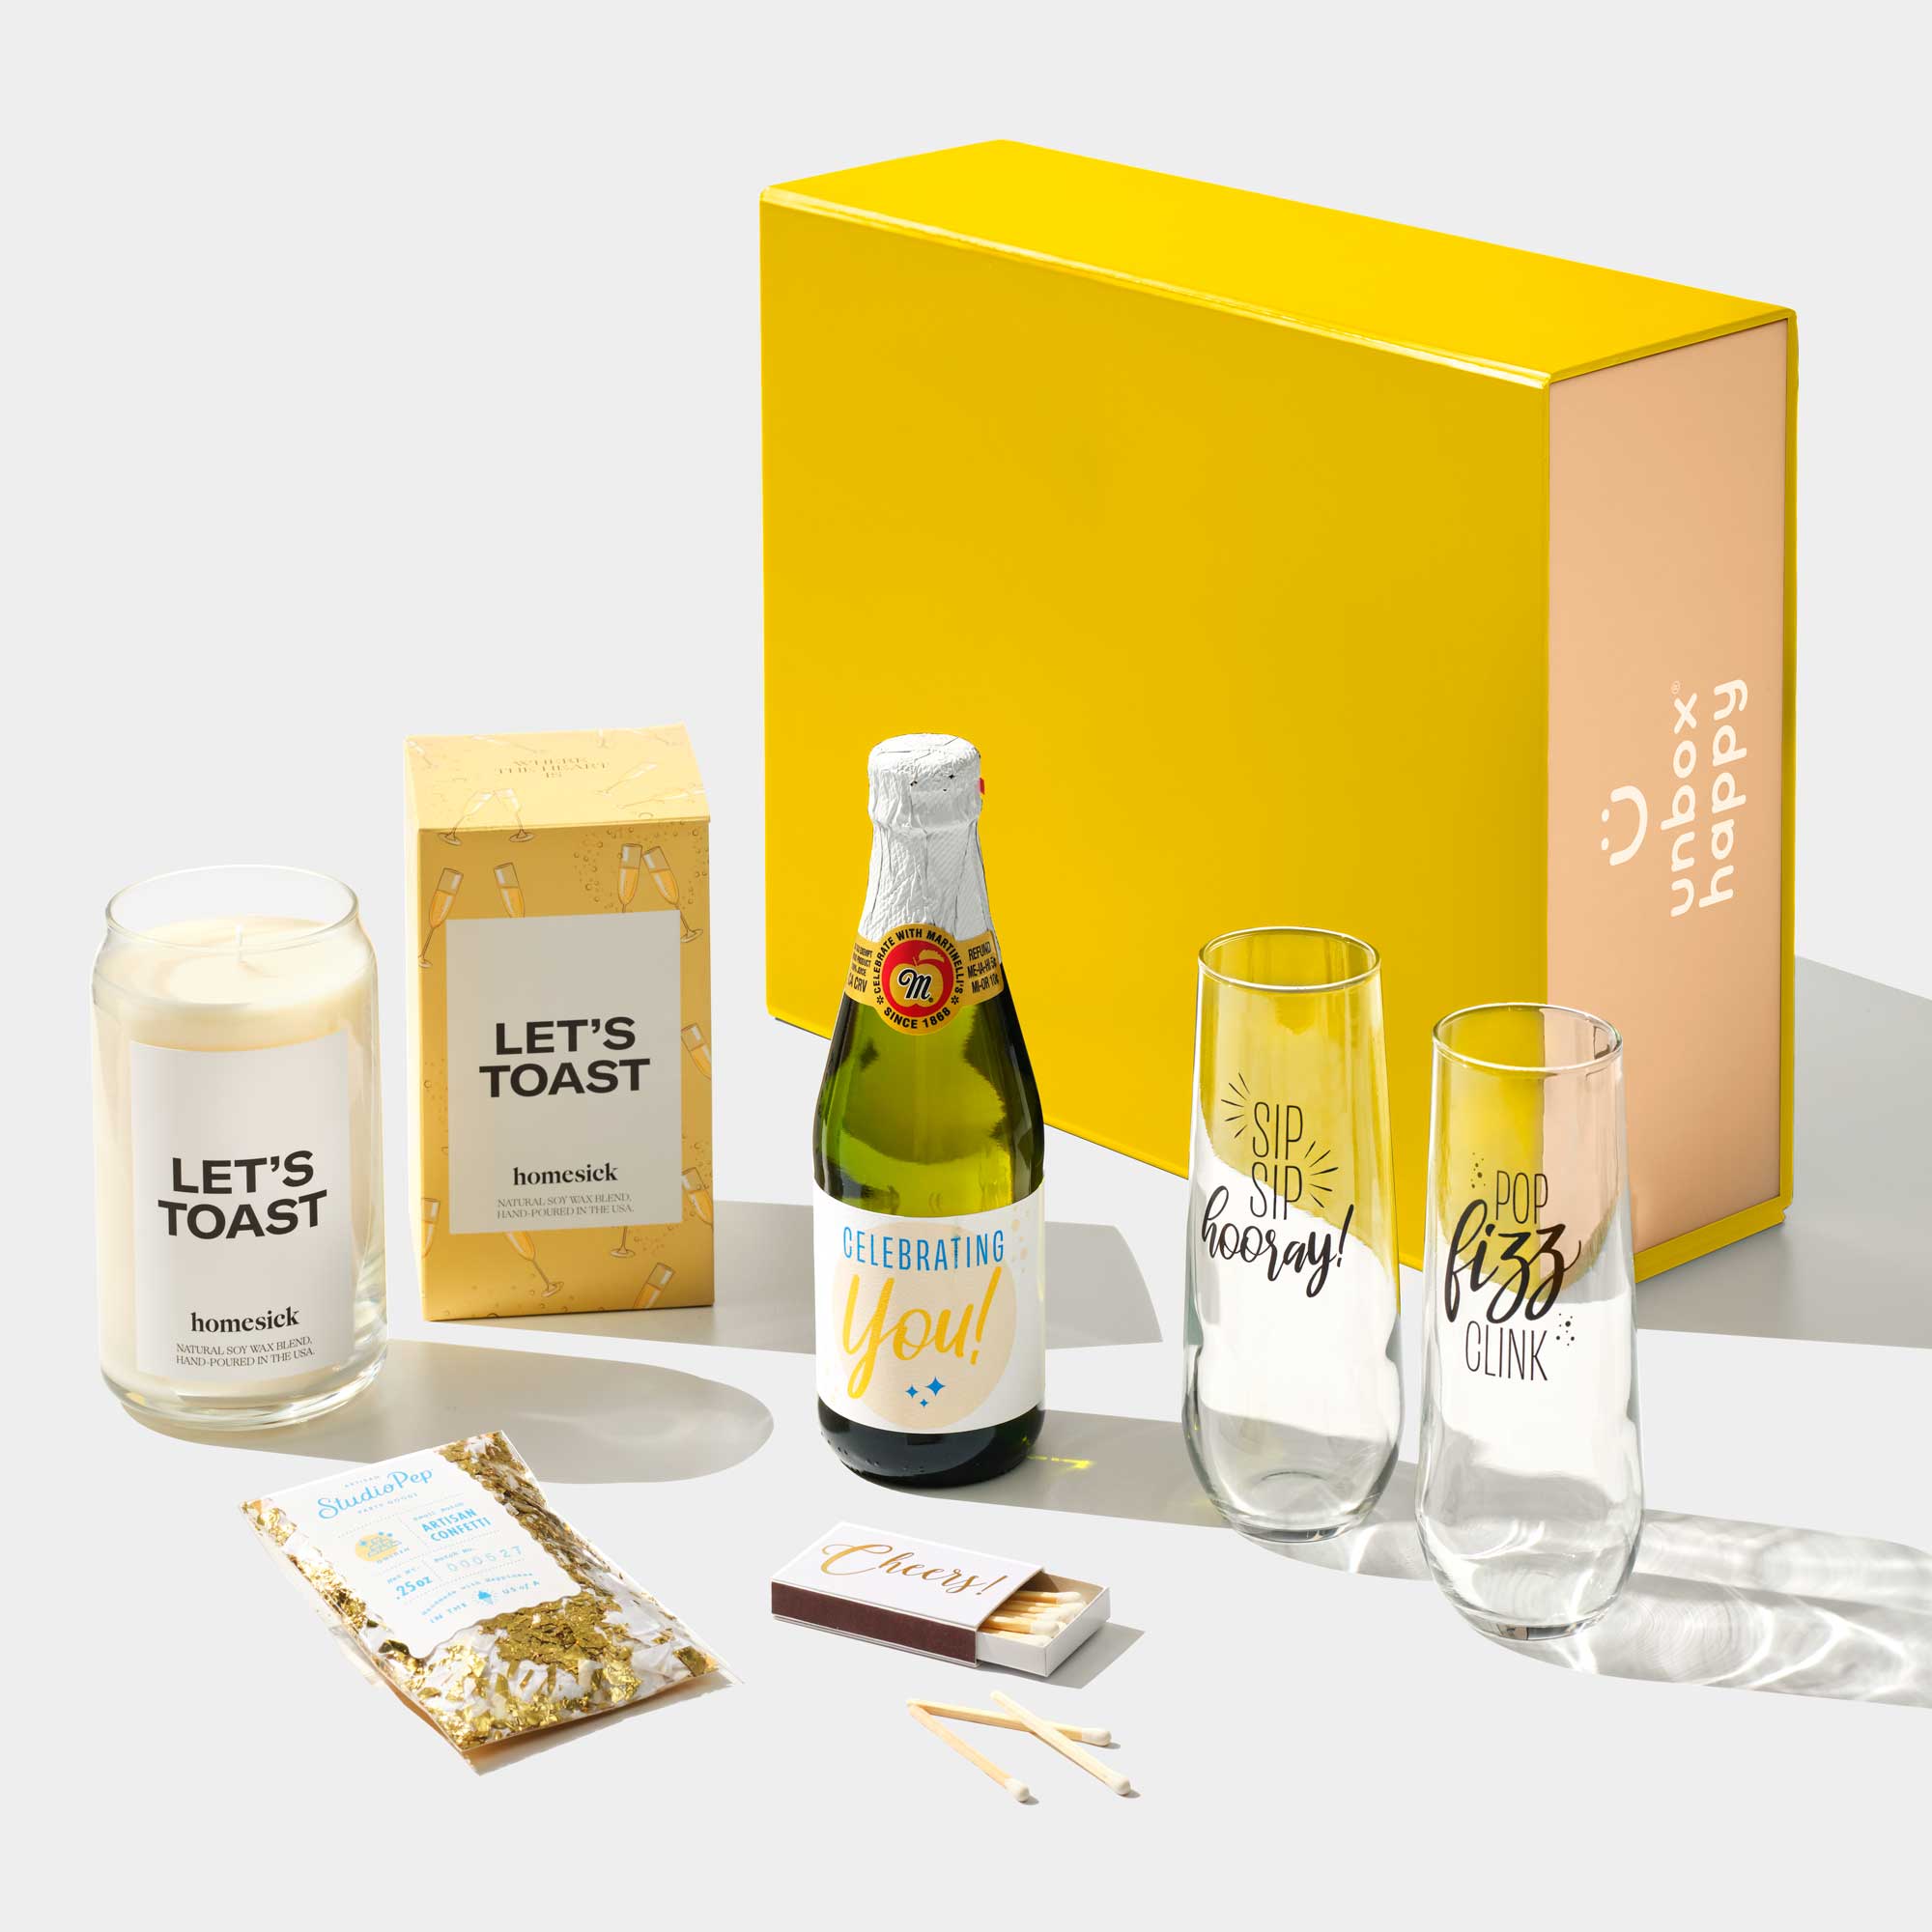 Delightly: A Toast to You Kit